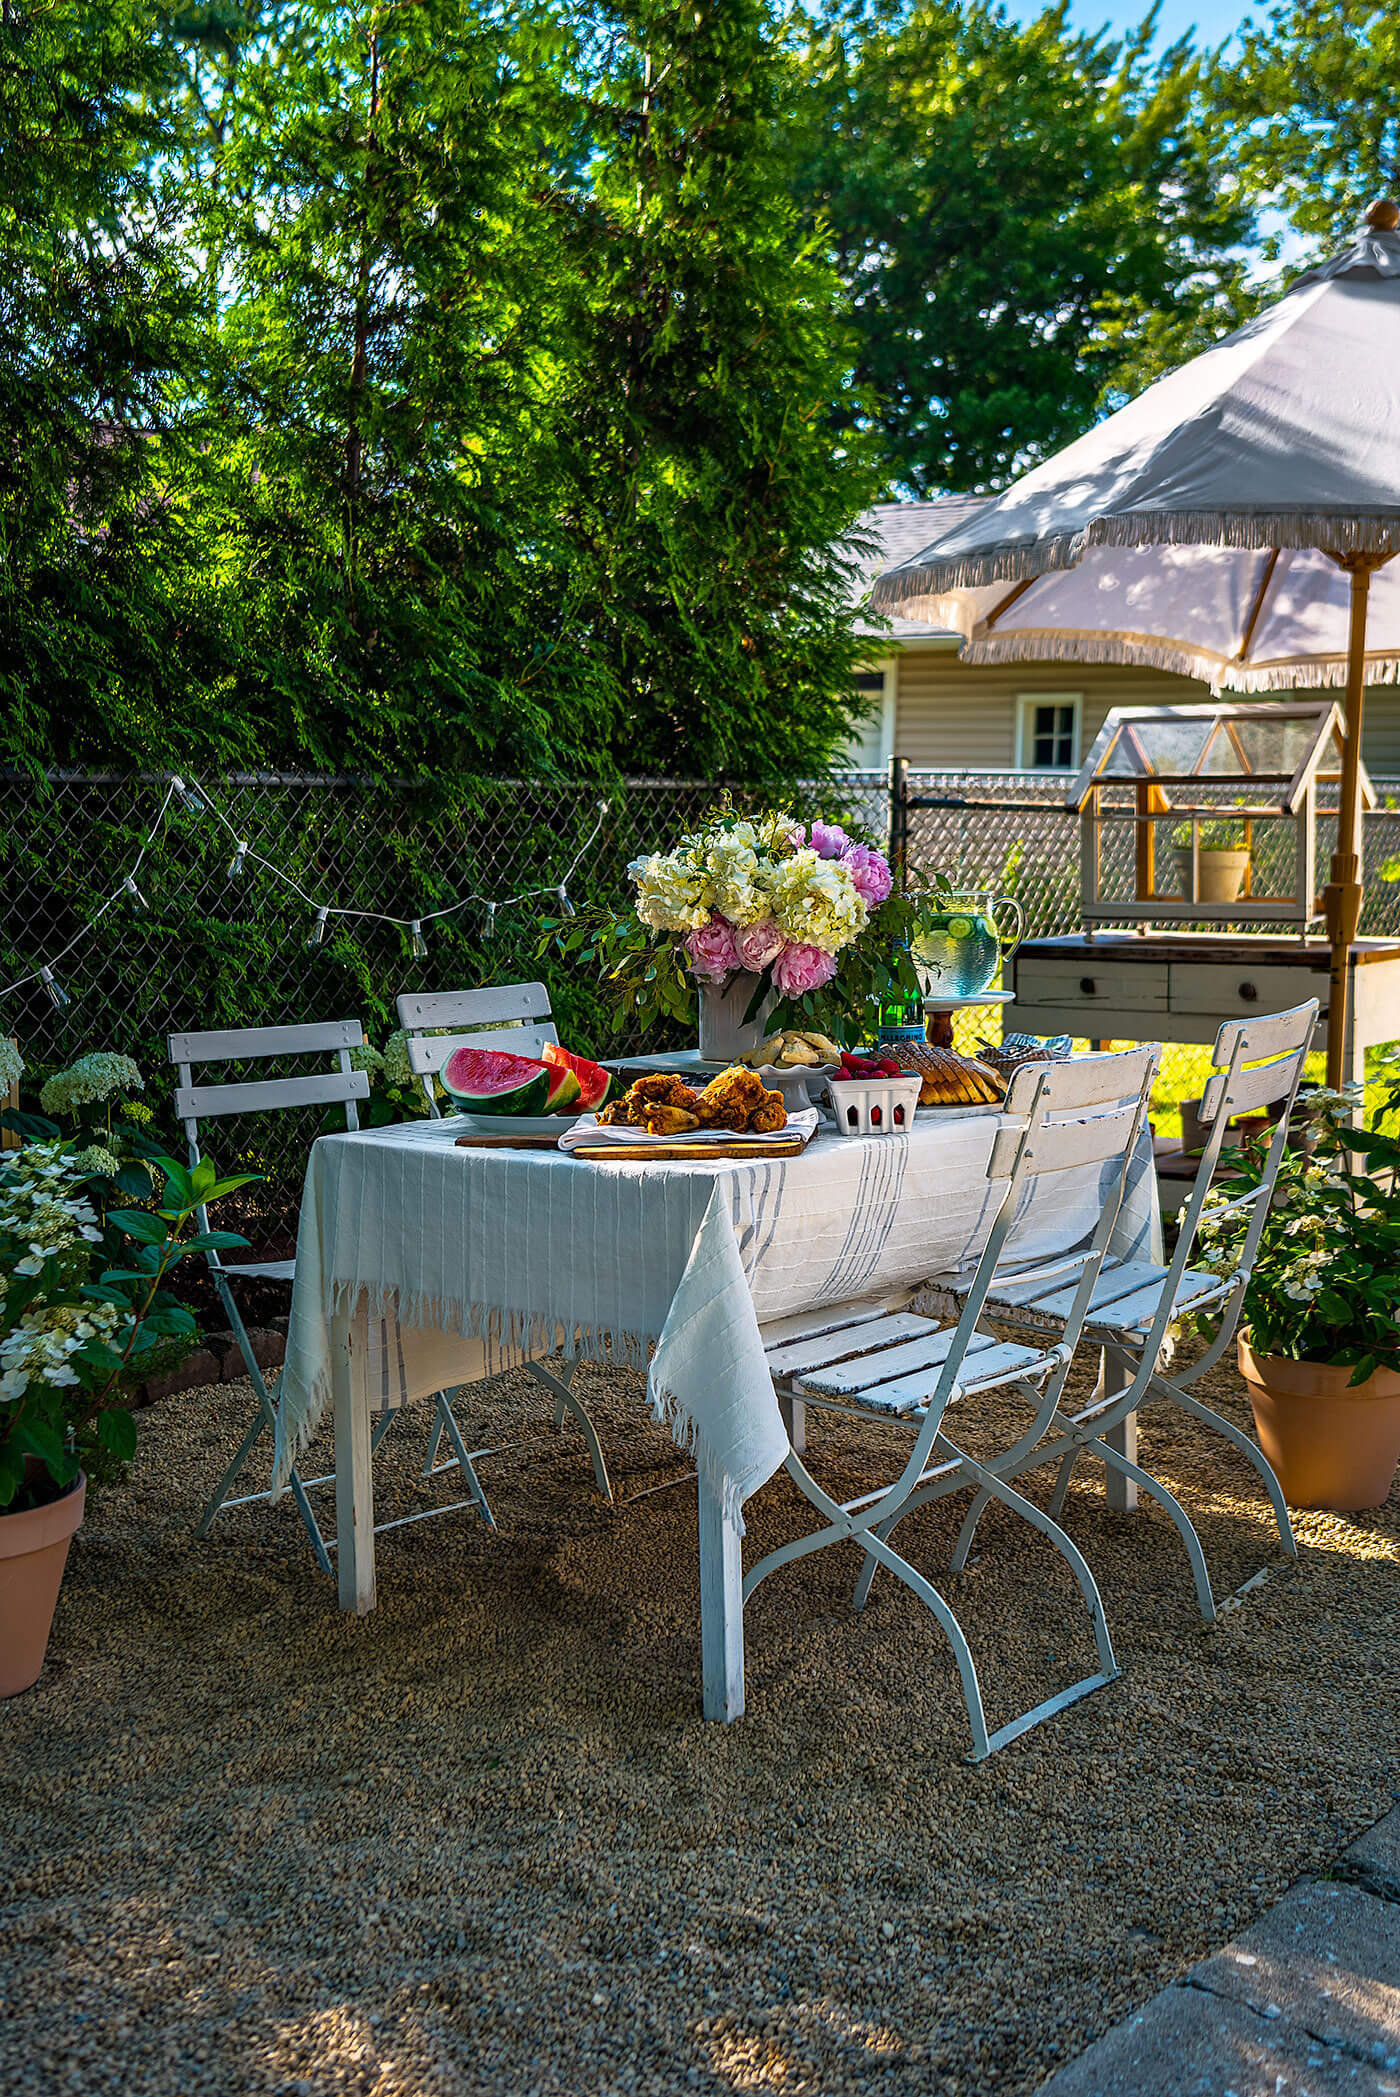 outdoor dining table set with flowers and summer watermelon and fried chicken